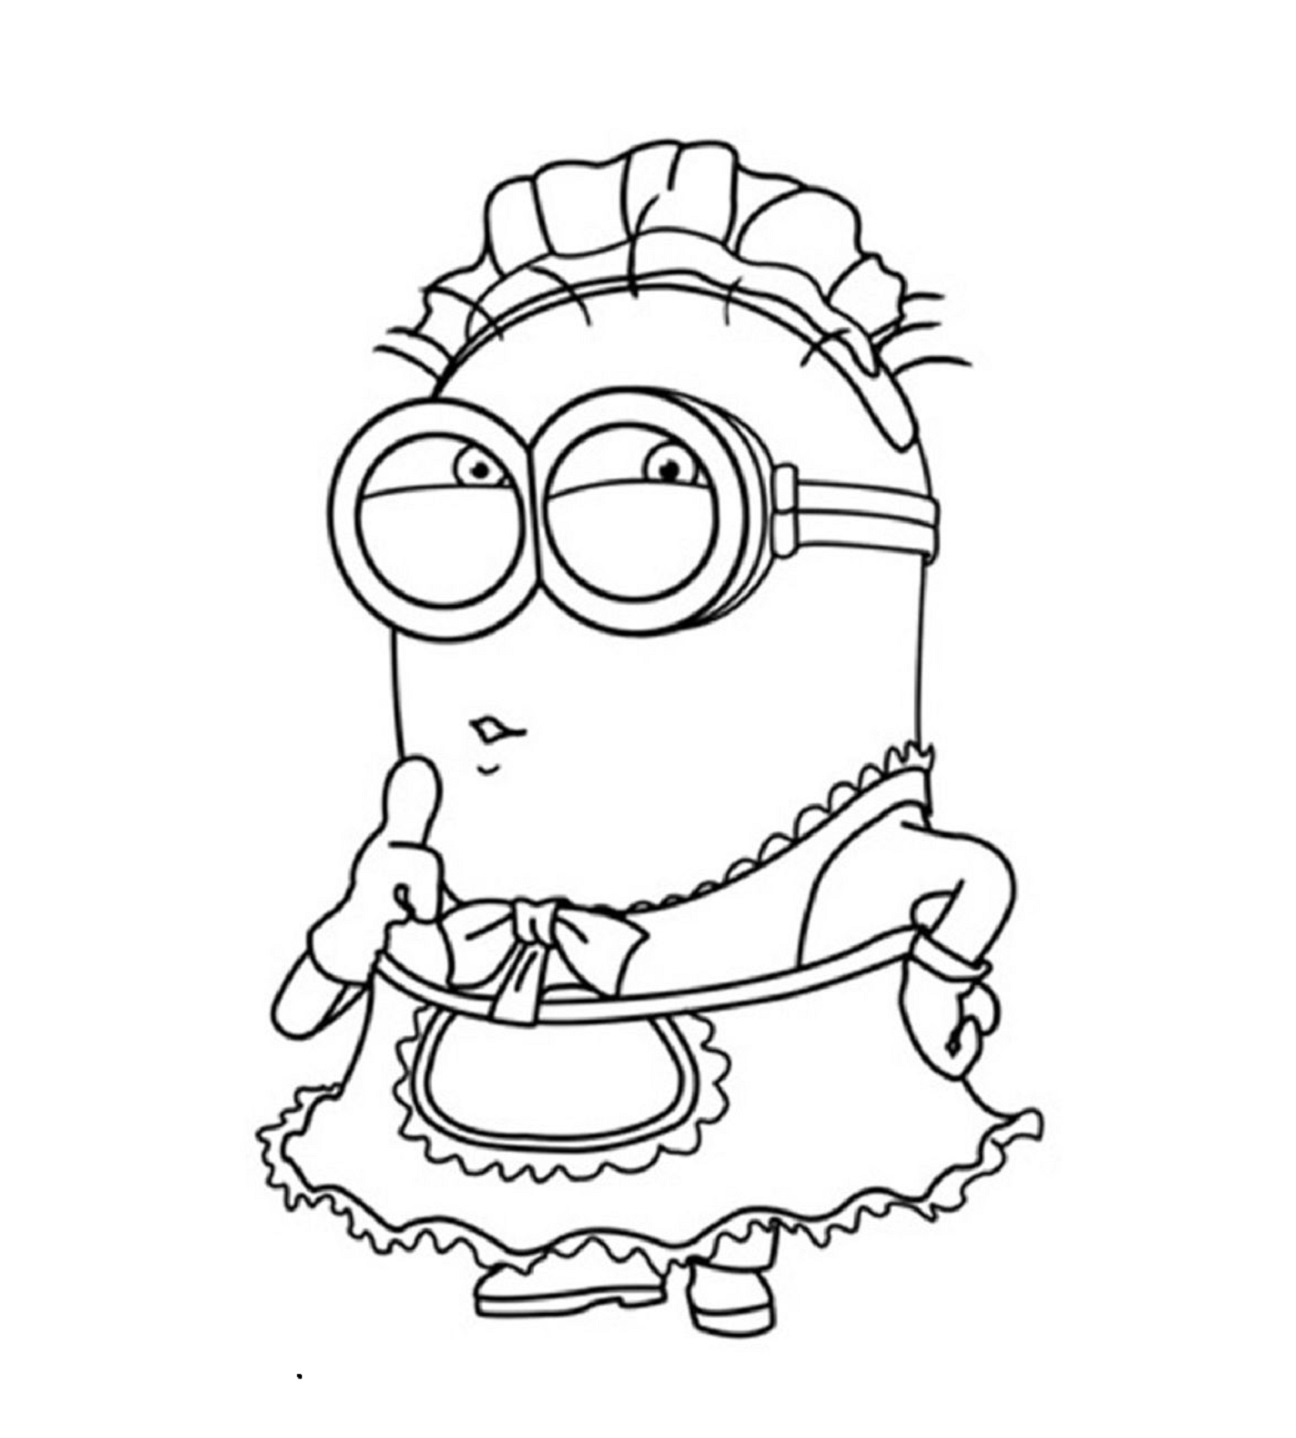 Printable Minion as Maid, thinking Coloring Page for kids.